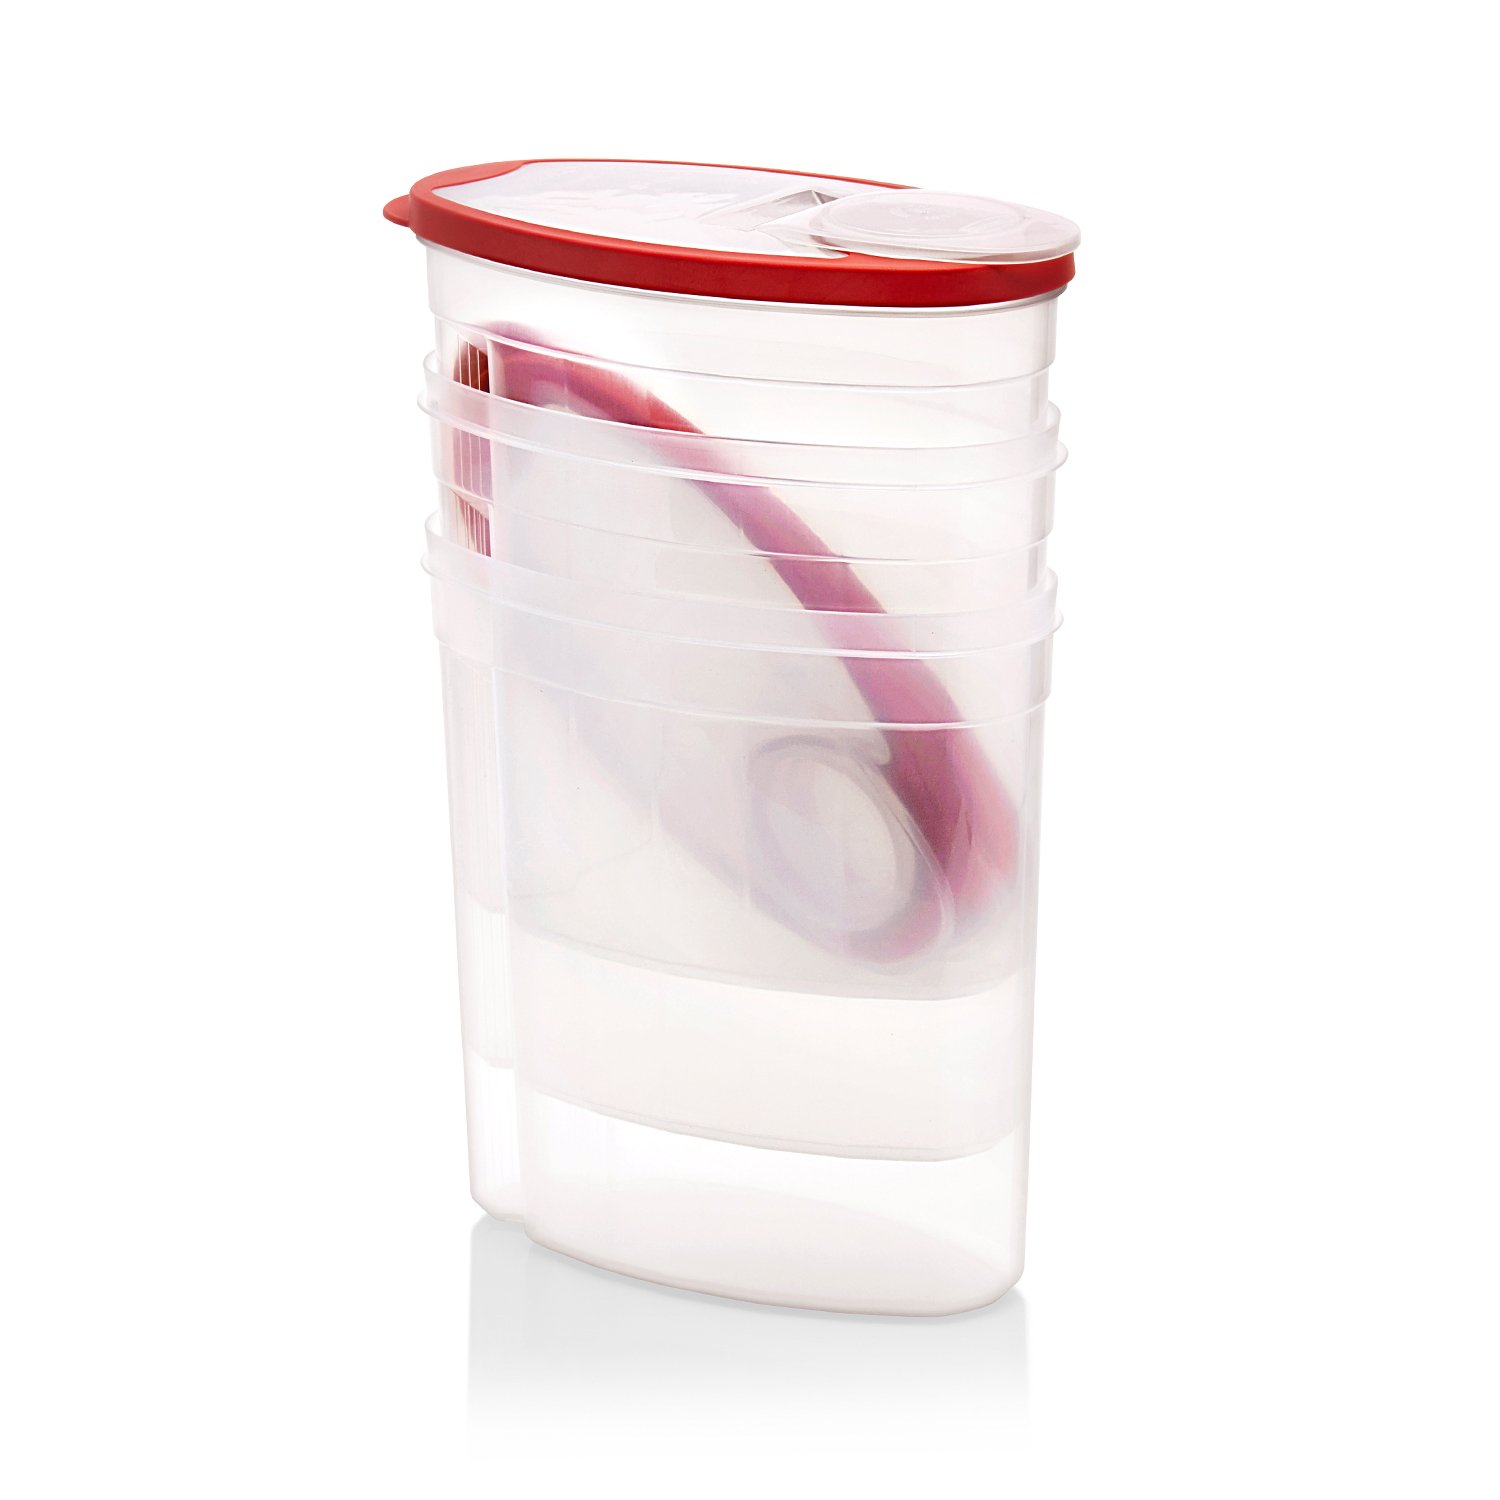 Rubbermaid 1856059 Snap Top BPA-Free Cereal Container